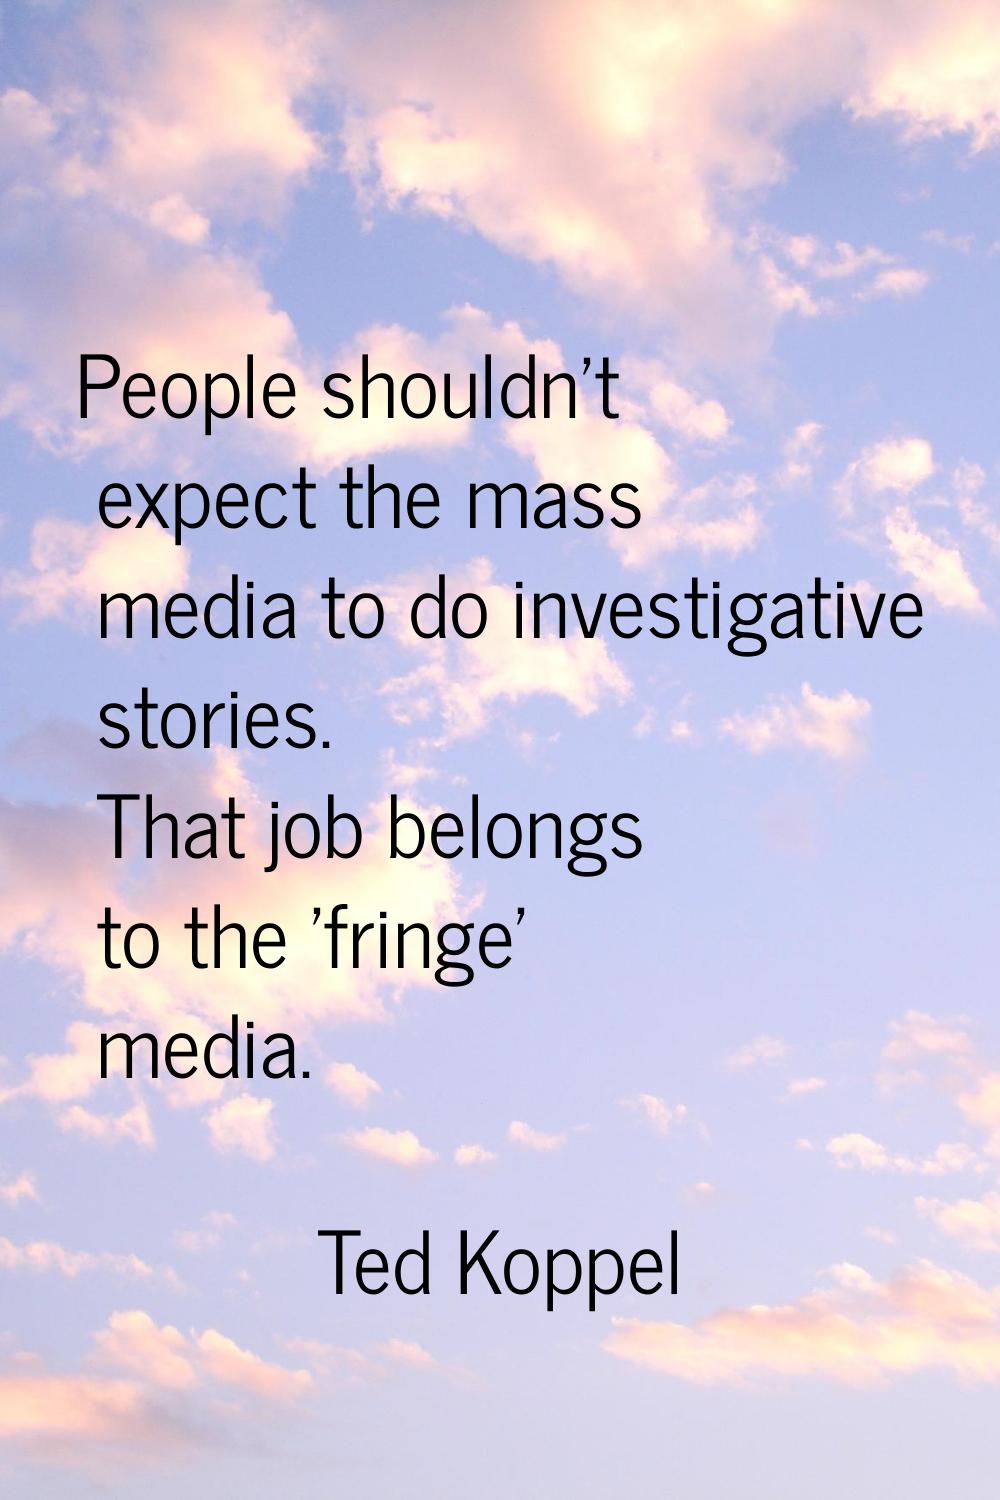 People shouldn't expect the mass media to do investigative stories. That job belongs to the 'fringe